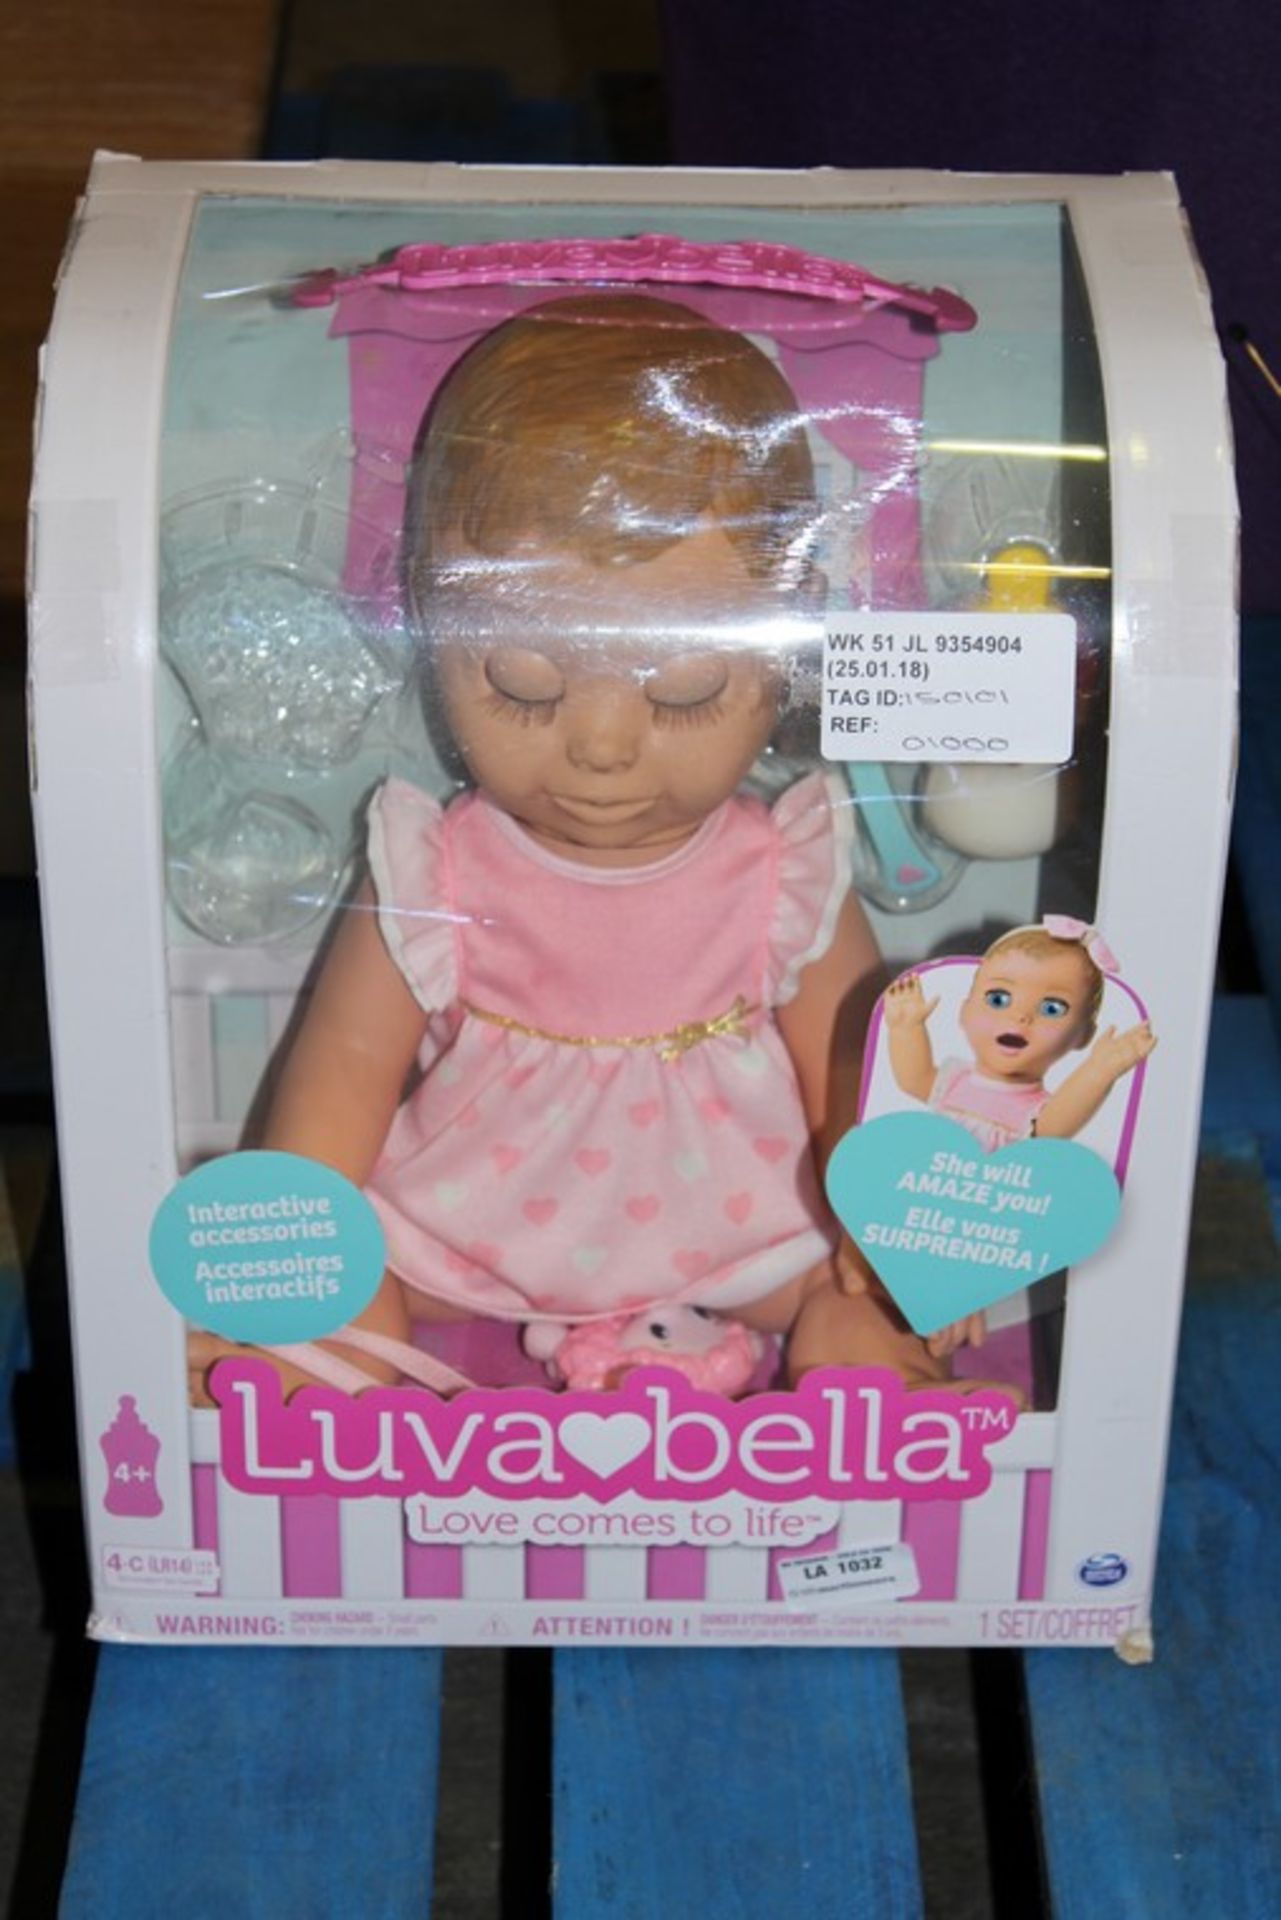 1 x LOVABELLA BABY DOLL RRP £100 (175342) *PLEASE NOTE THAT THE BID PRICE IS MULTIPLIED BY THE